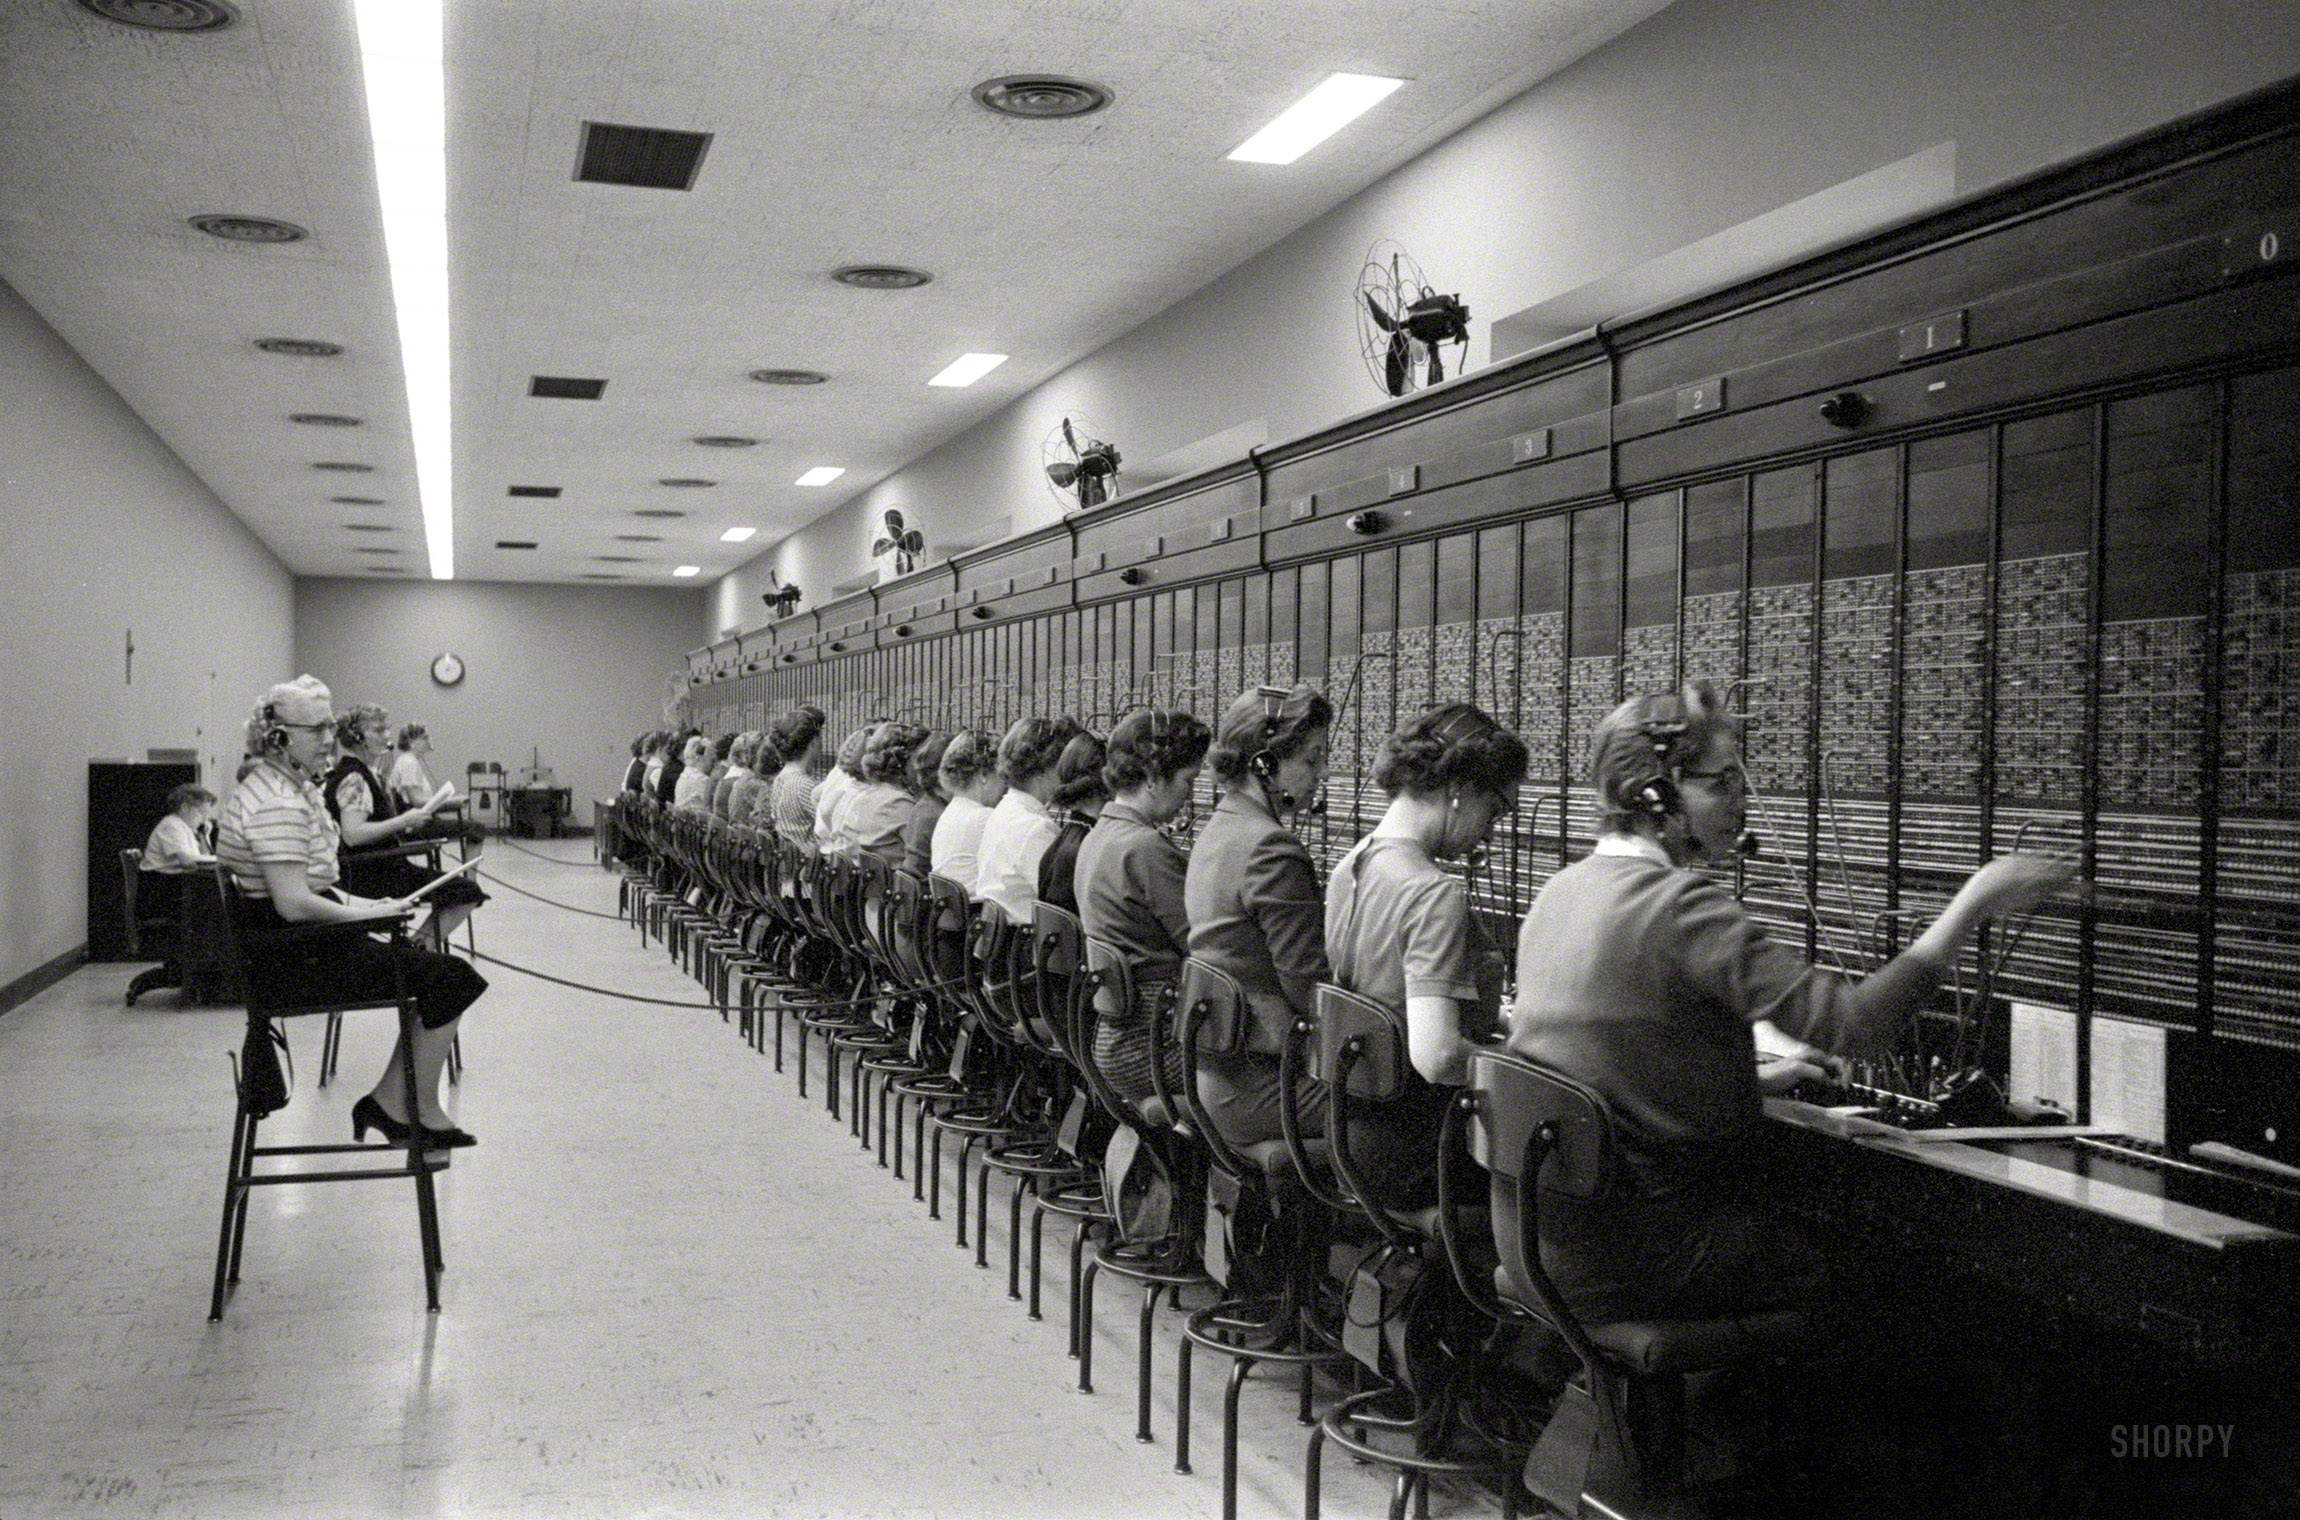 January 27, 1959. Washington, D.C. "Women working at the U.S. Capitol switchboard. An average of 50,000 calls are placed through the board daily." Photo by Marion Trikosko for U.S. News & World Report. View full size.